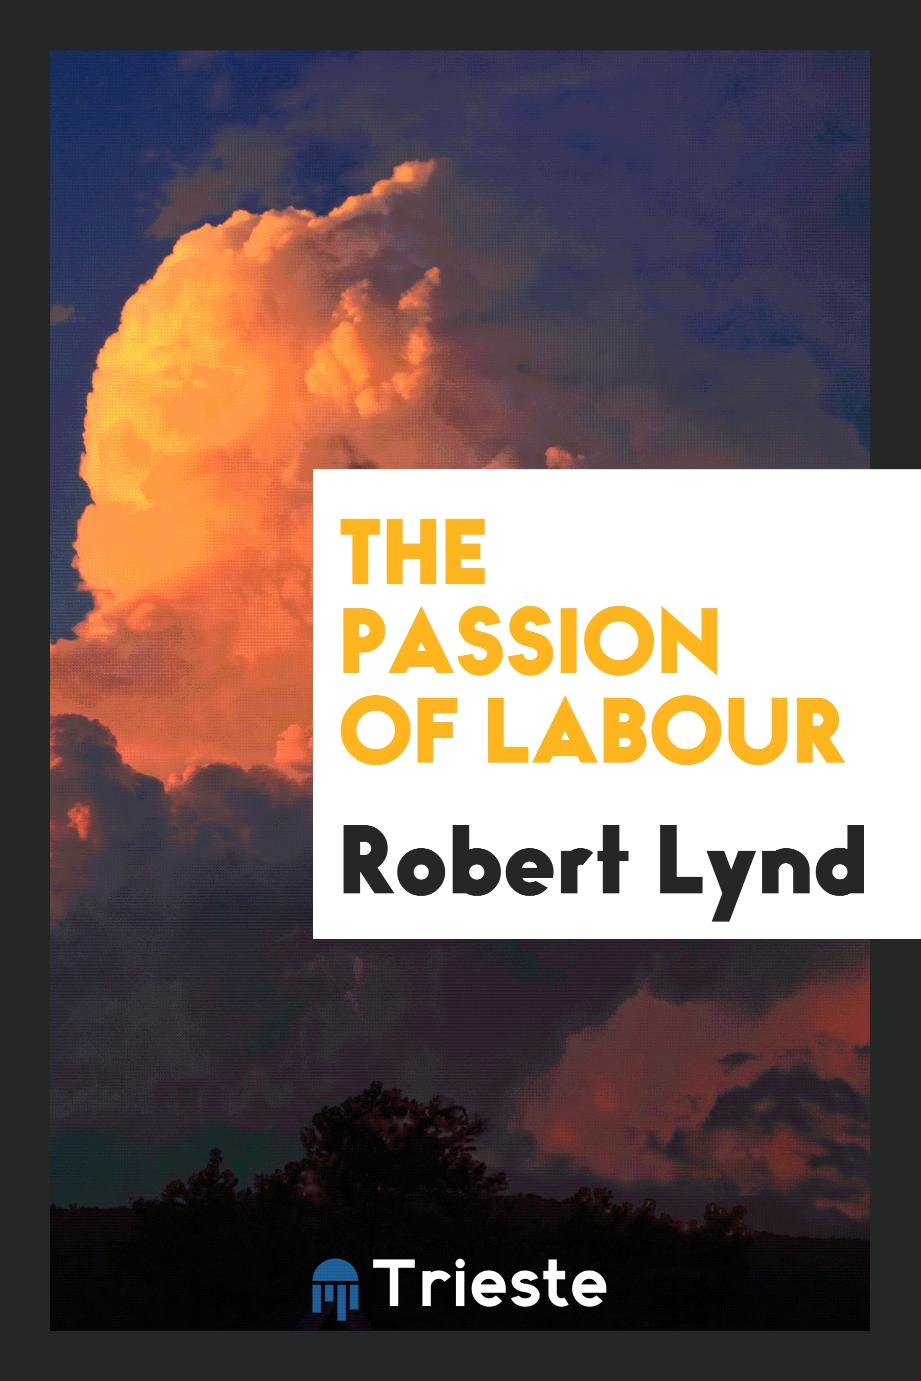 The passion of labour